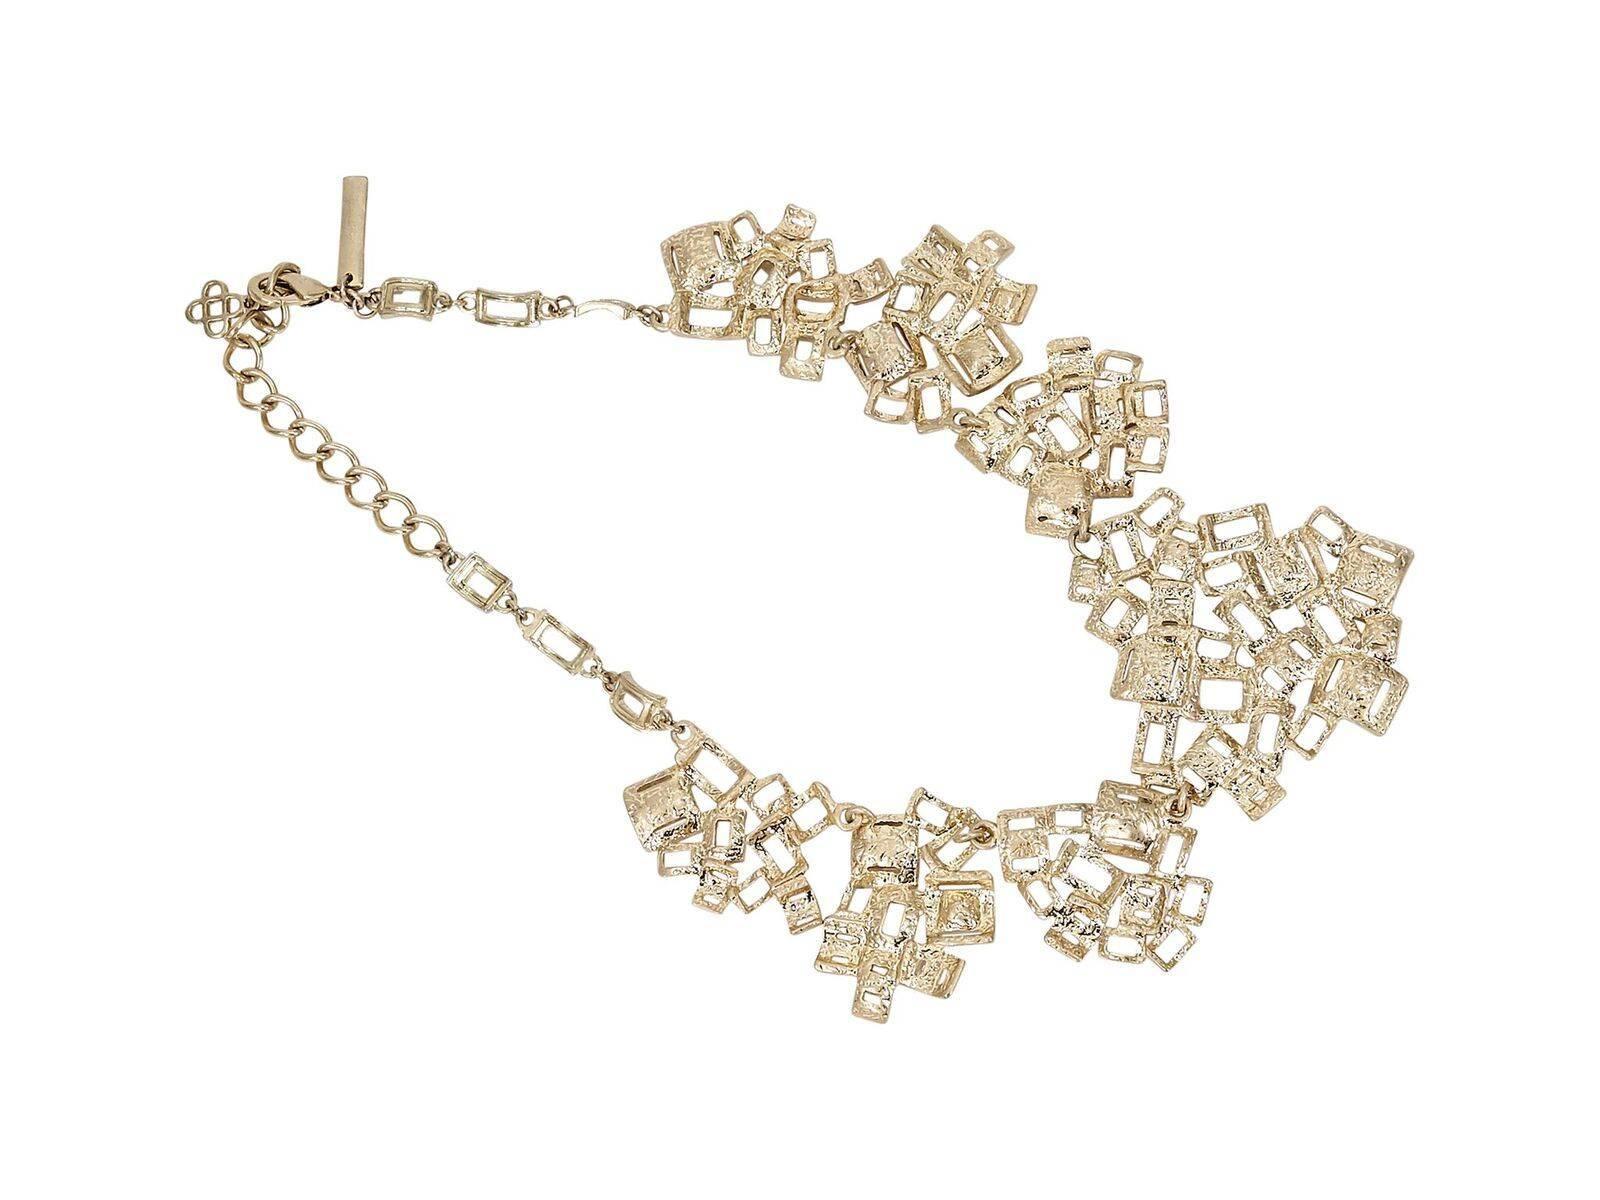 Product details:  Goldtone statement necklace by Oscar de la Renta.  Accented with crystals.  Adjustable clasp closure.  17.5